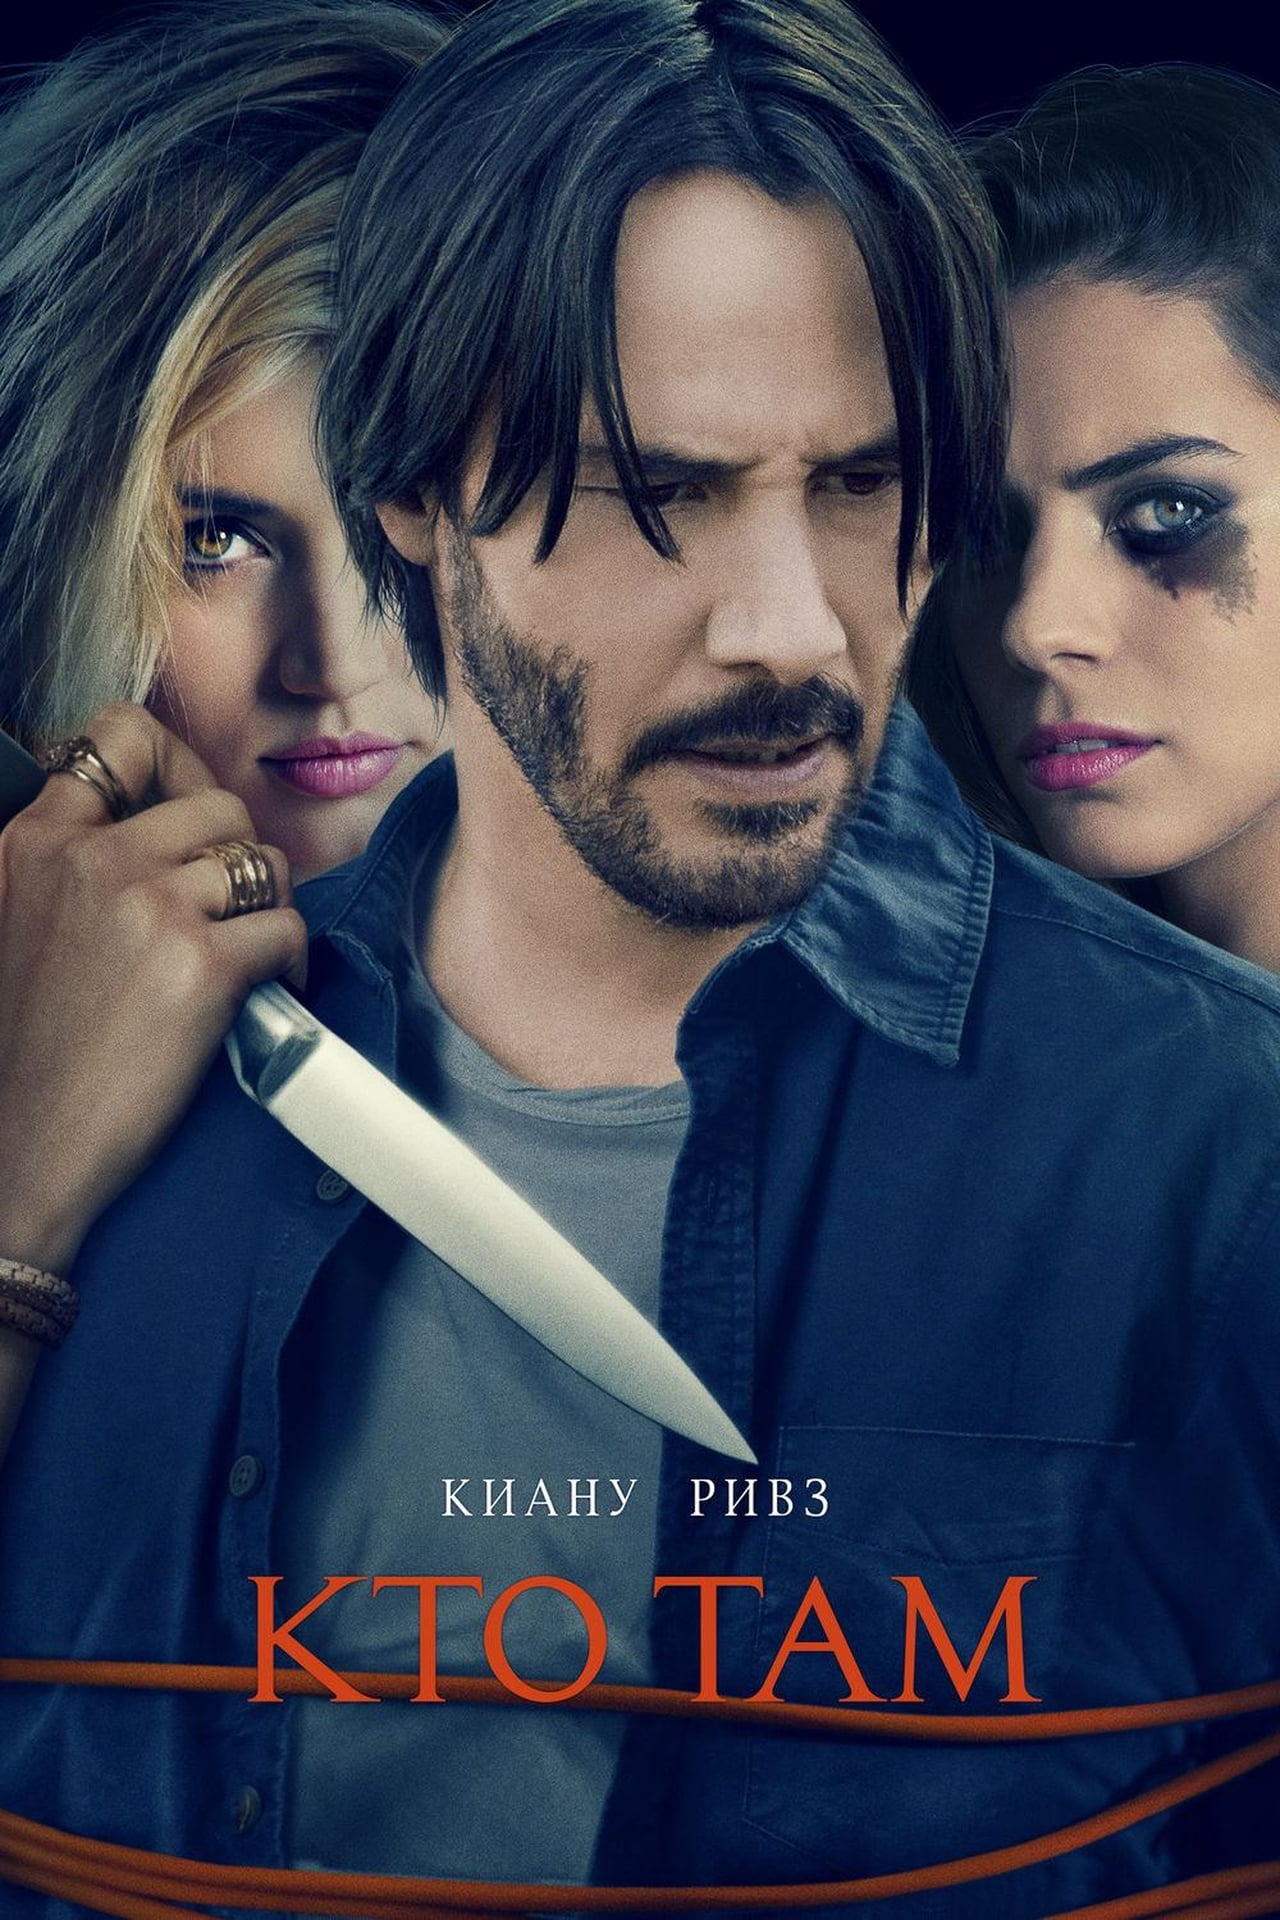 Knock Knock (2015) Film Review. Directed by Eli Roth 